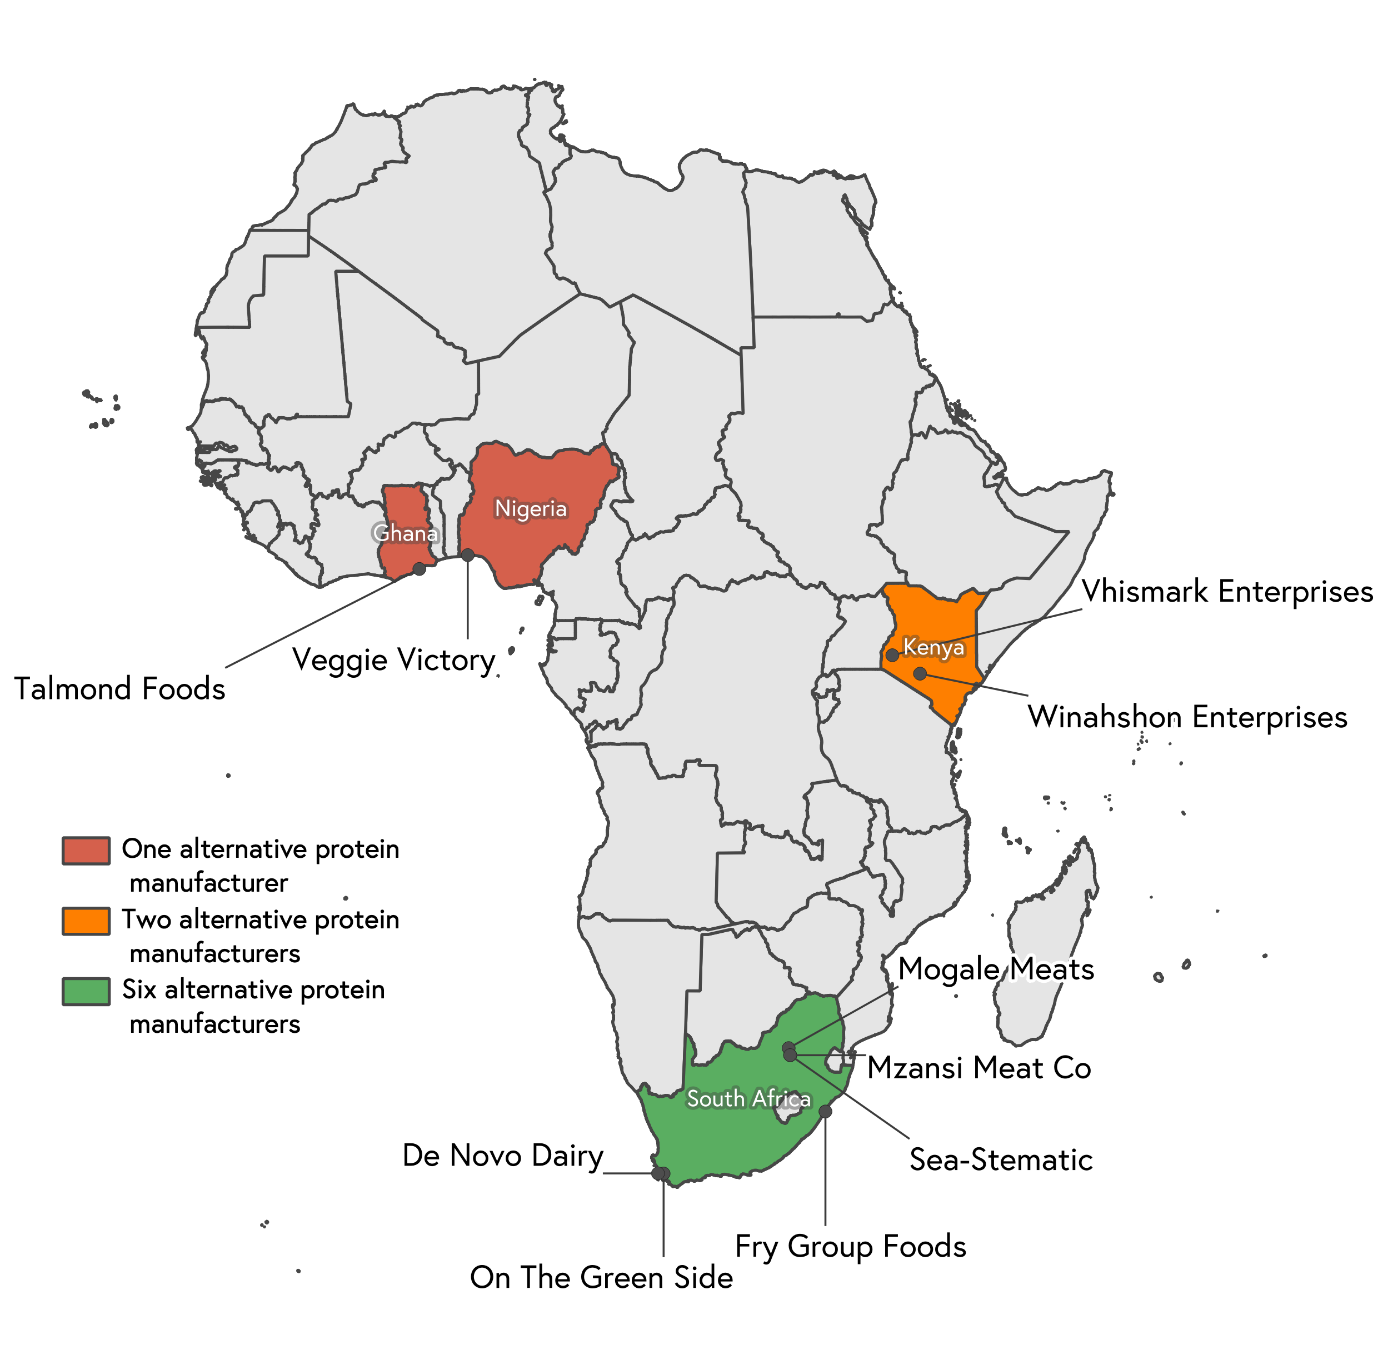 Figure 14: Map of alternative protein manufacturers within sub-Saharan Africa. Data source: Good Food Institute and Crunchbase. 6 are in South Africa, 2 are in Kenya, 1 in Nigeria, 1 in Ghana.